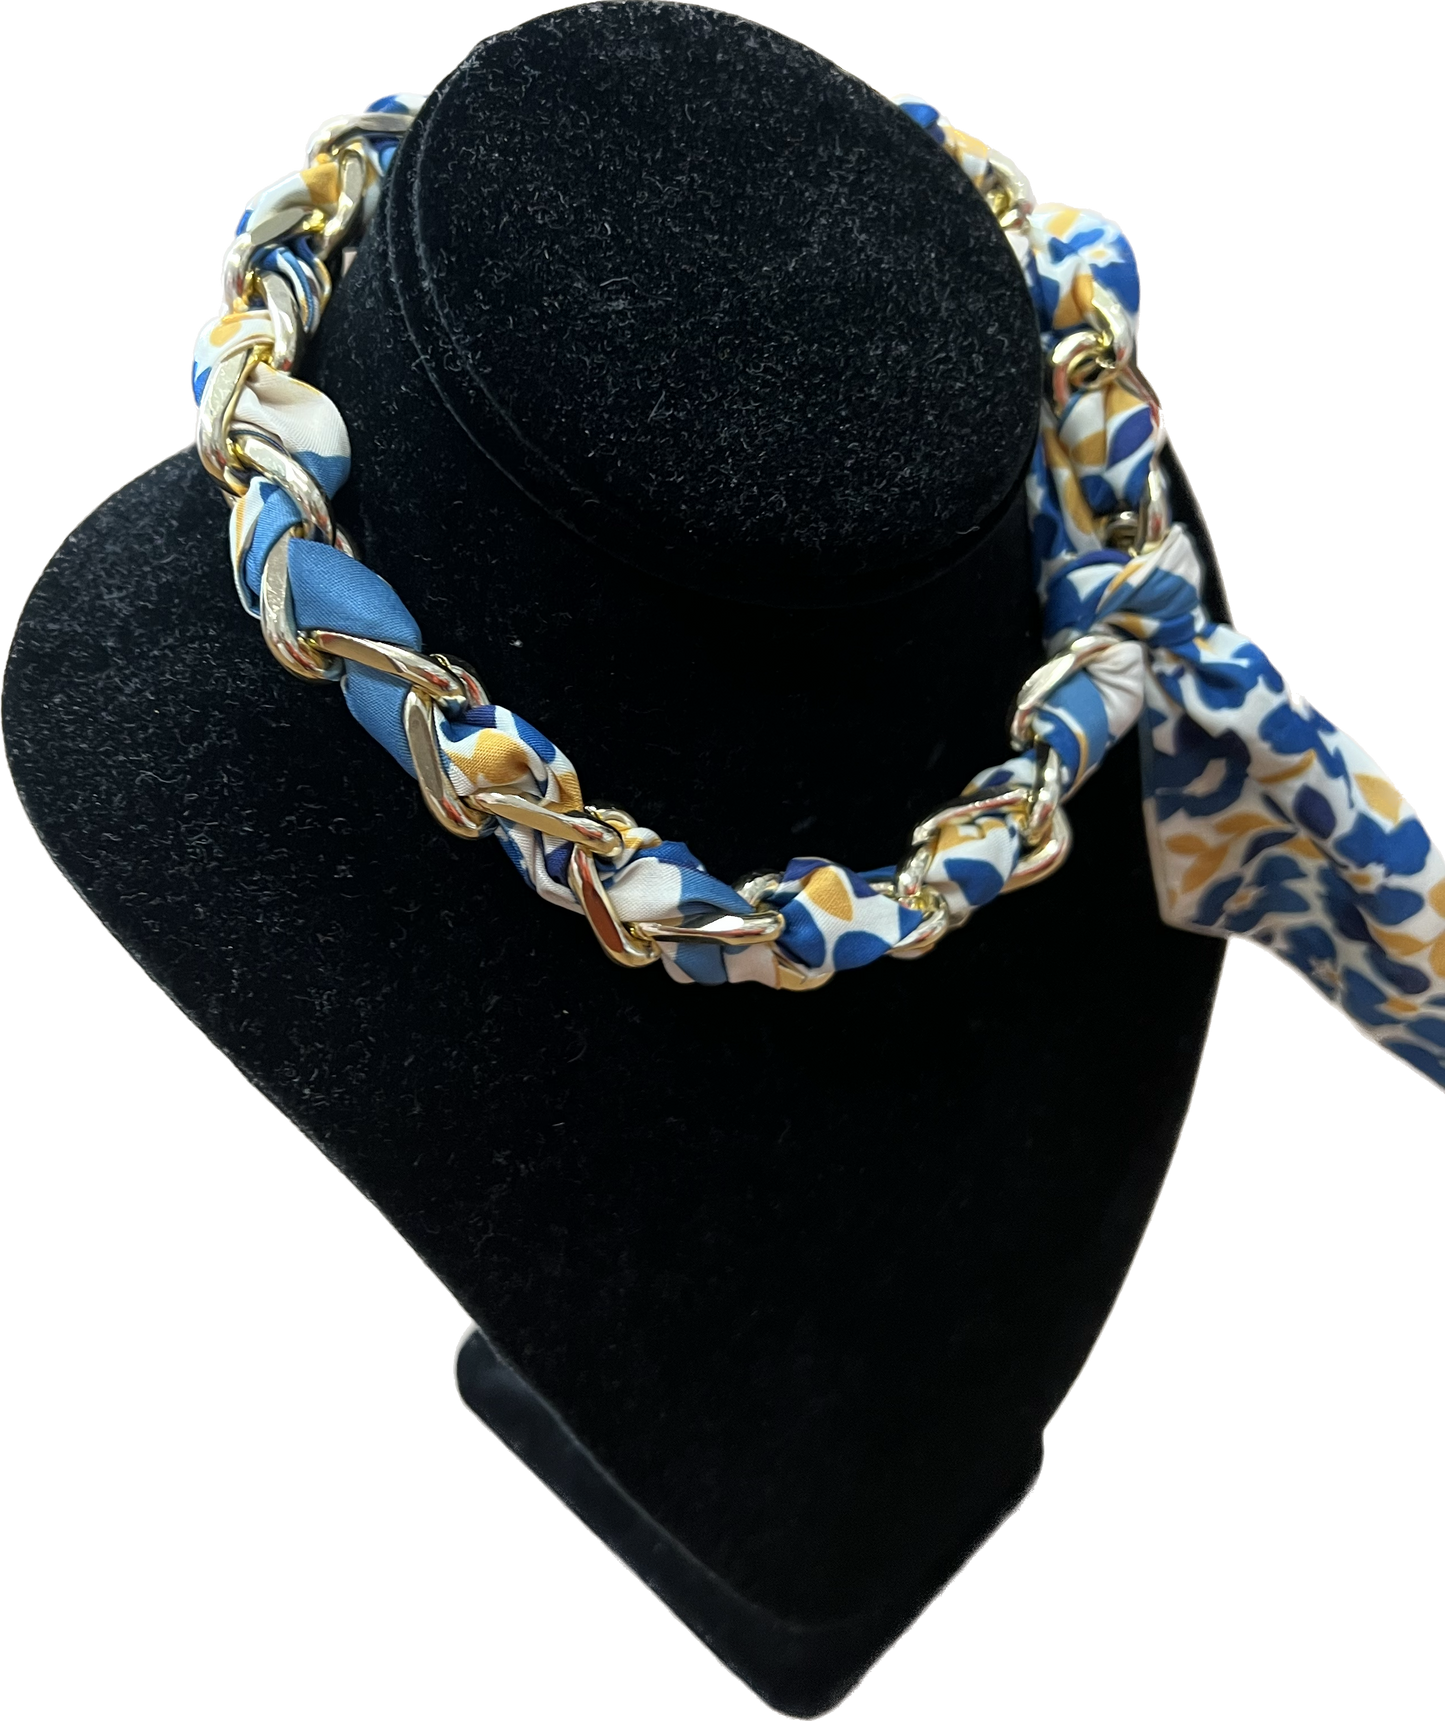 Scarf chain necklace